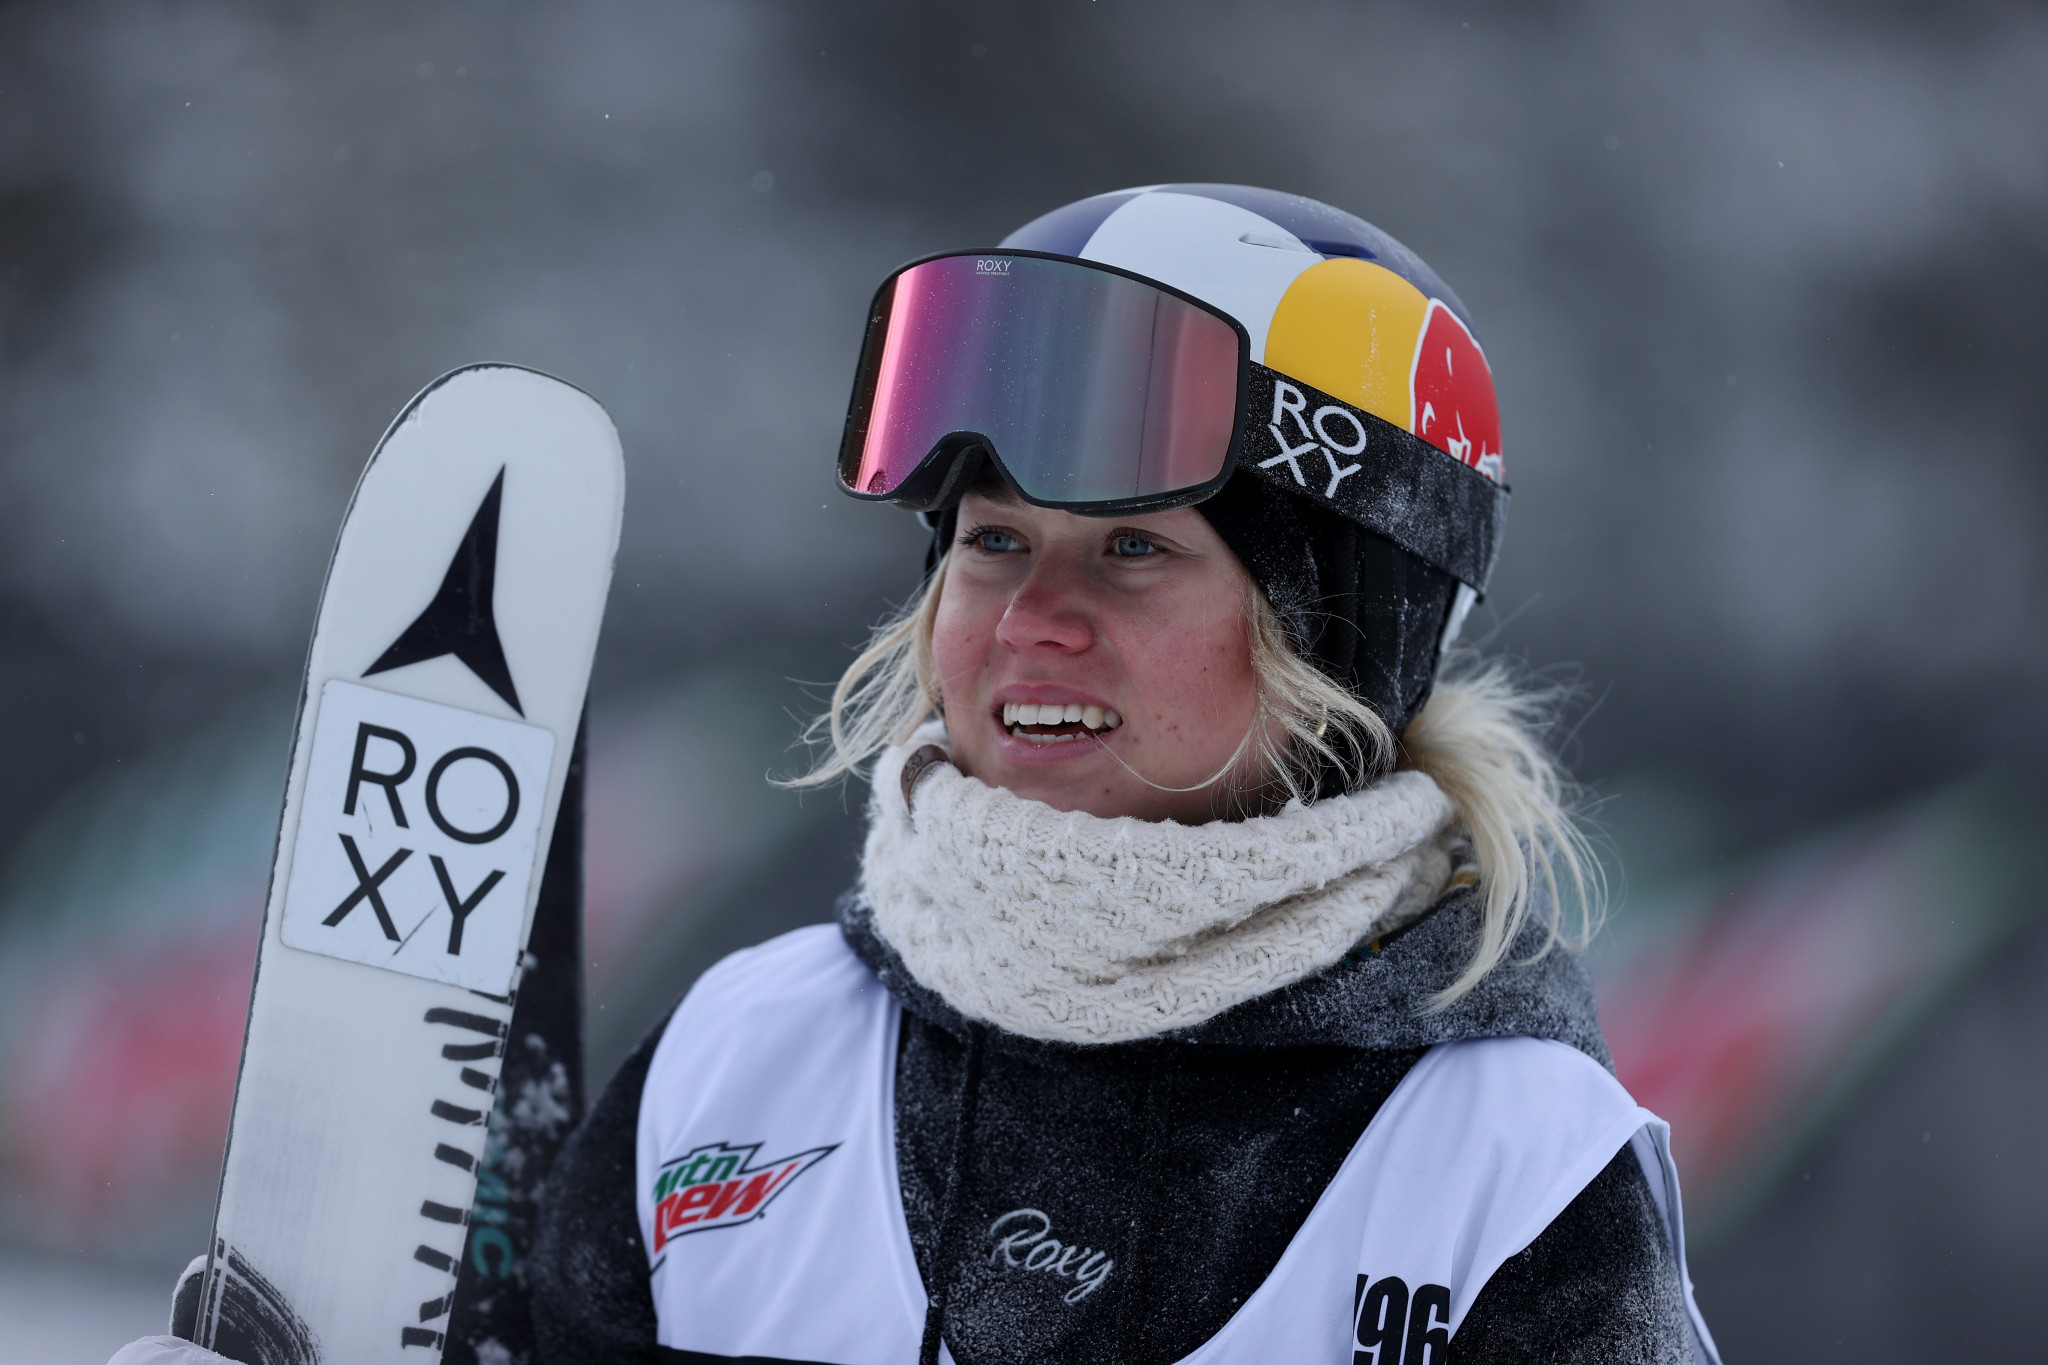 Double champion Ledeux achieves Winter X Games first and McMorris earns 10th title